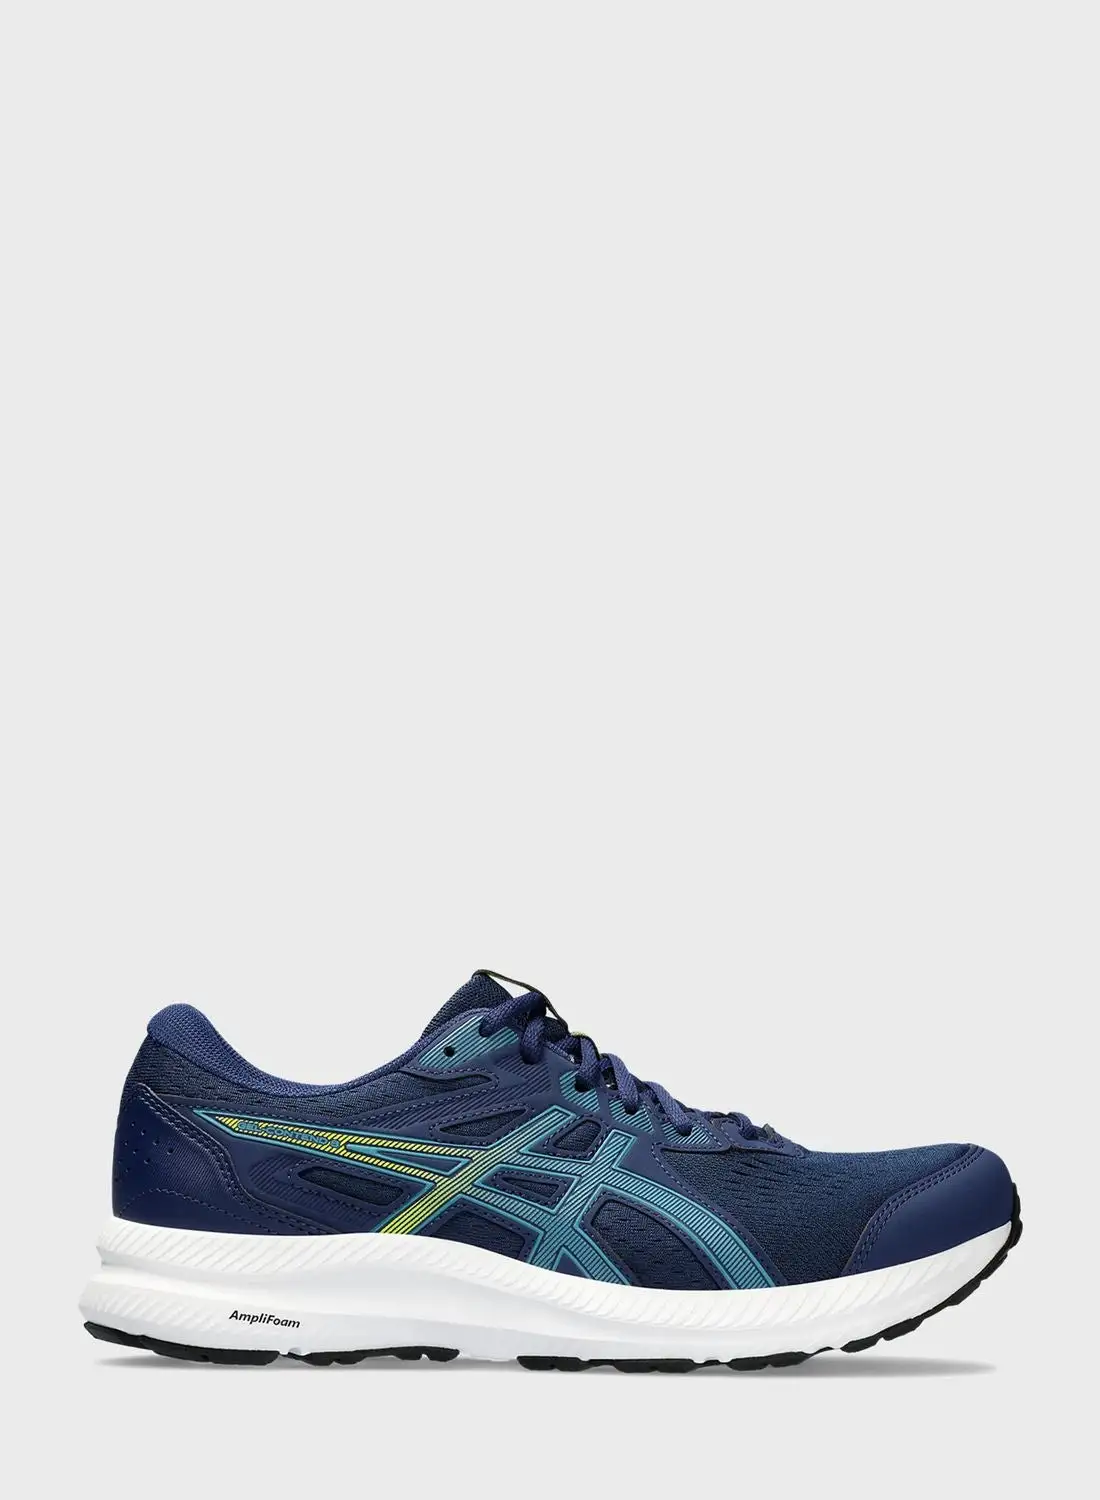 asics Gel-Contend 8 Extra Wide